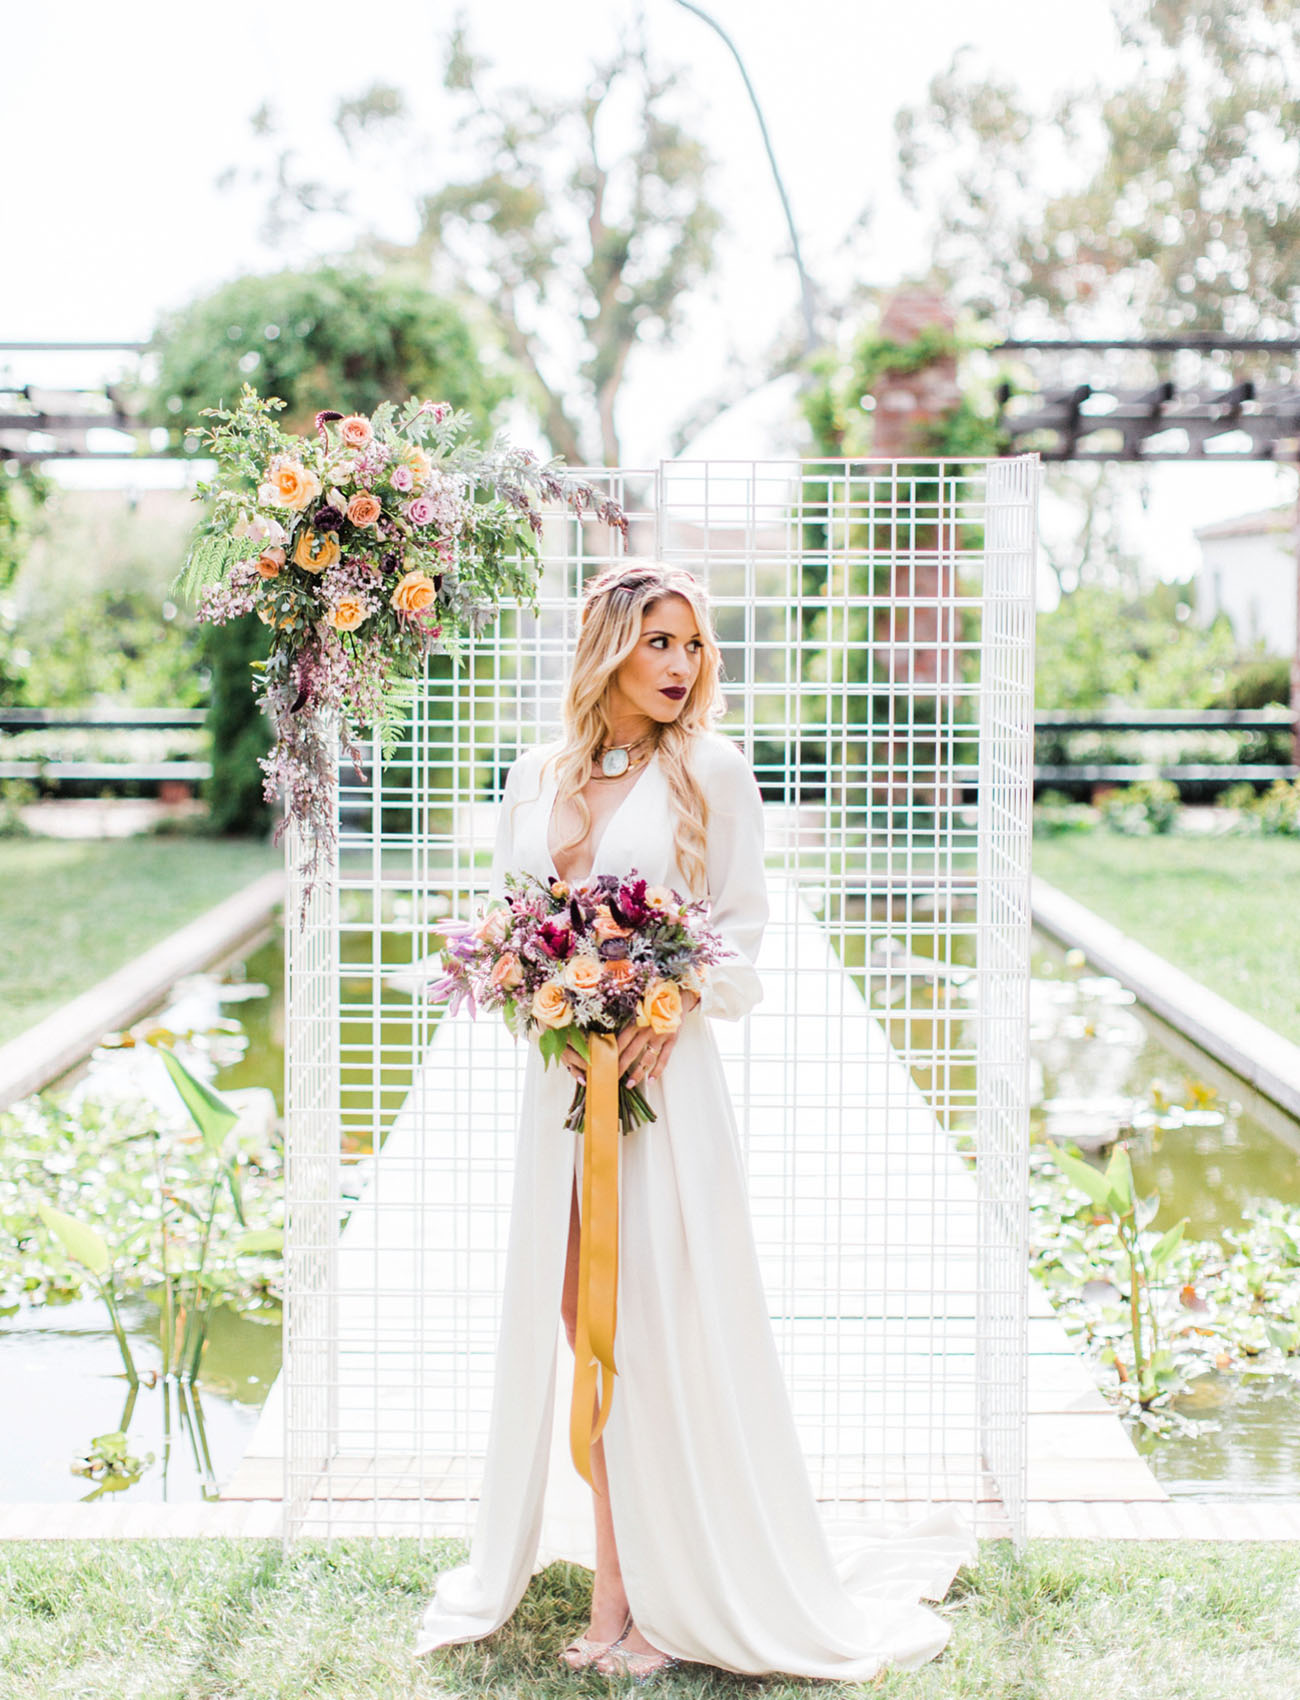 Colorful + Iridescent Wedding Inspiration With Bubbles!